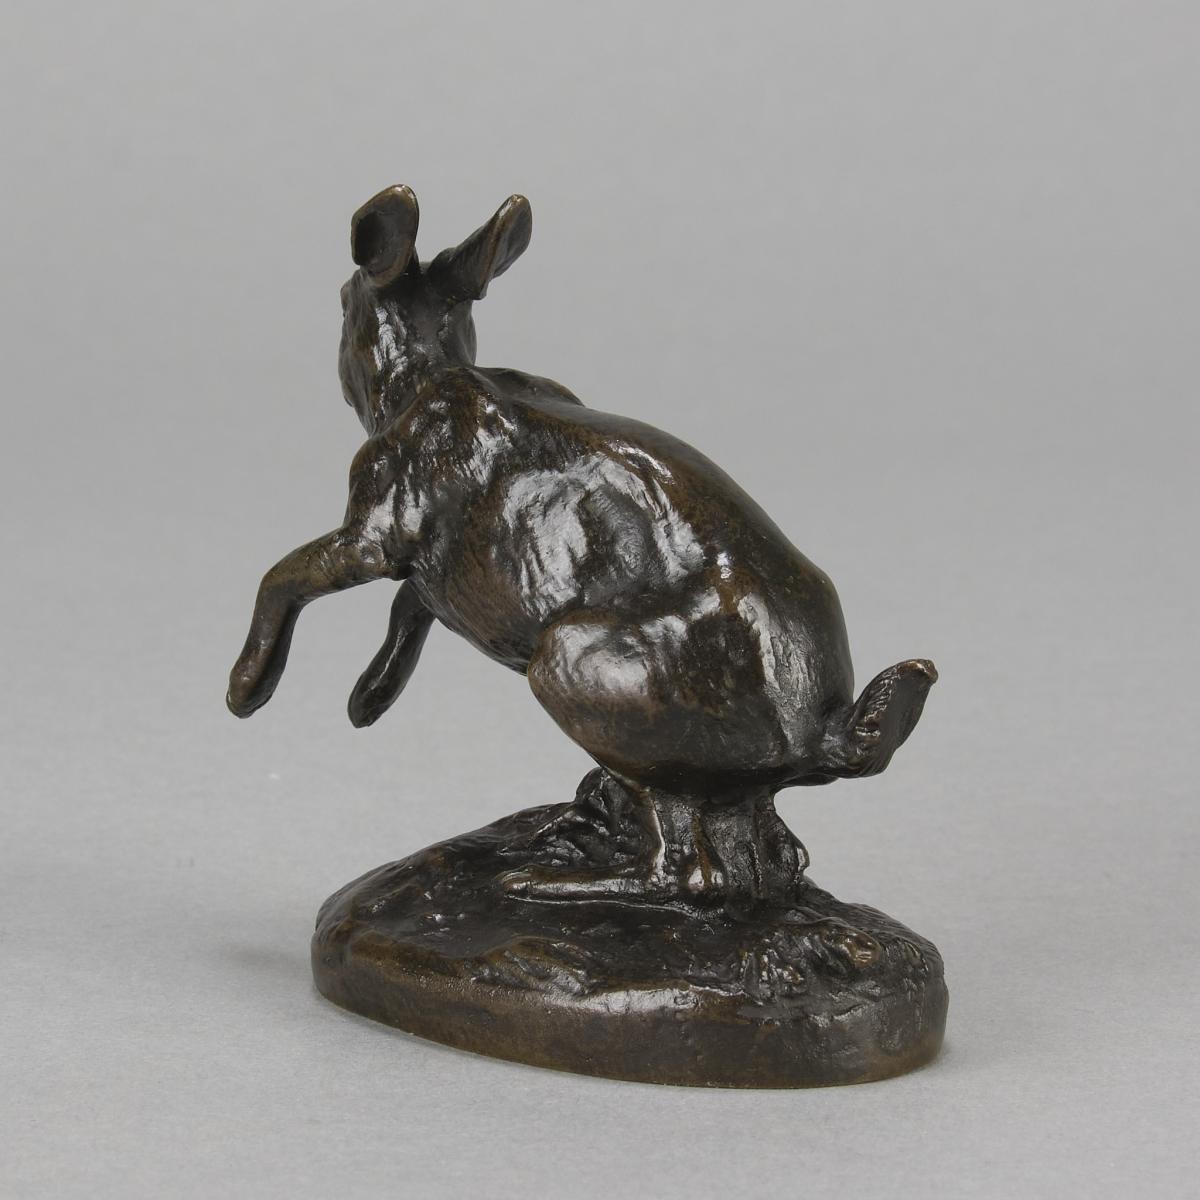  Early 20th Century Animalier Bronze entitled "Leaping Hare" by Louis Vidal